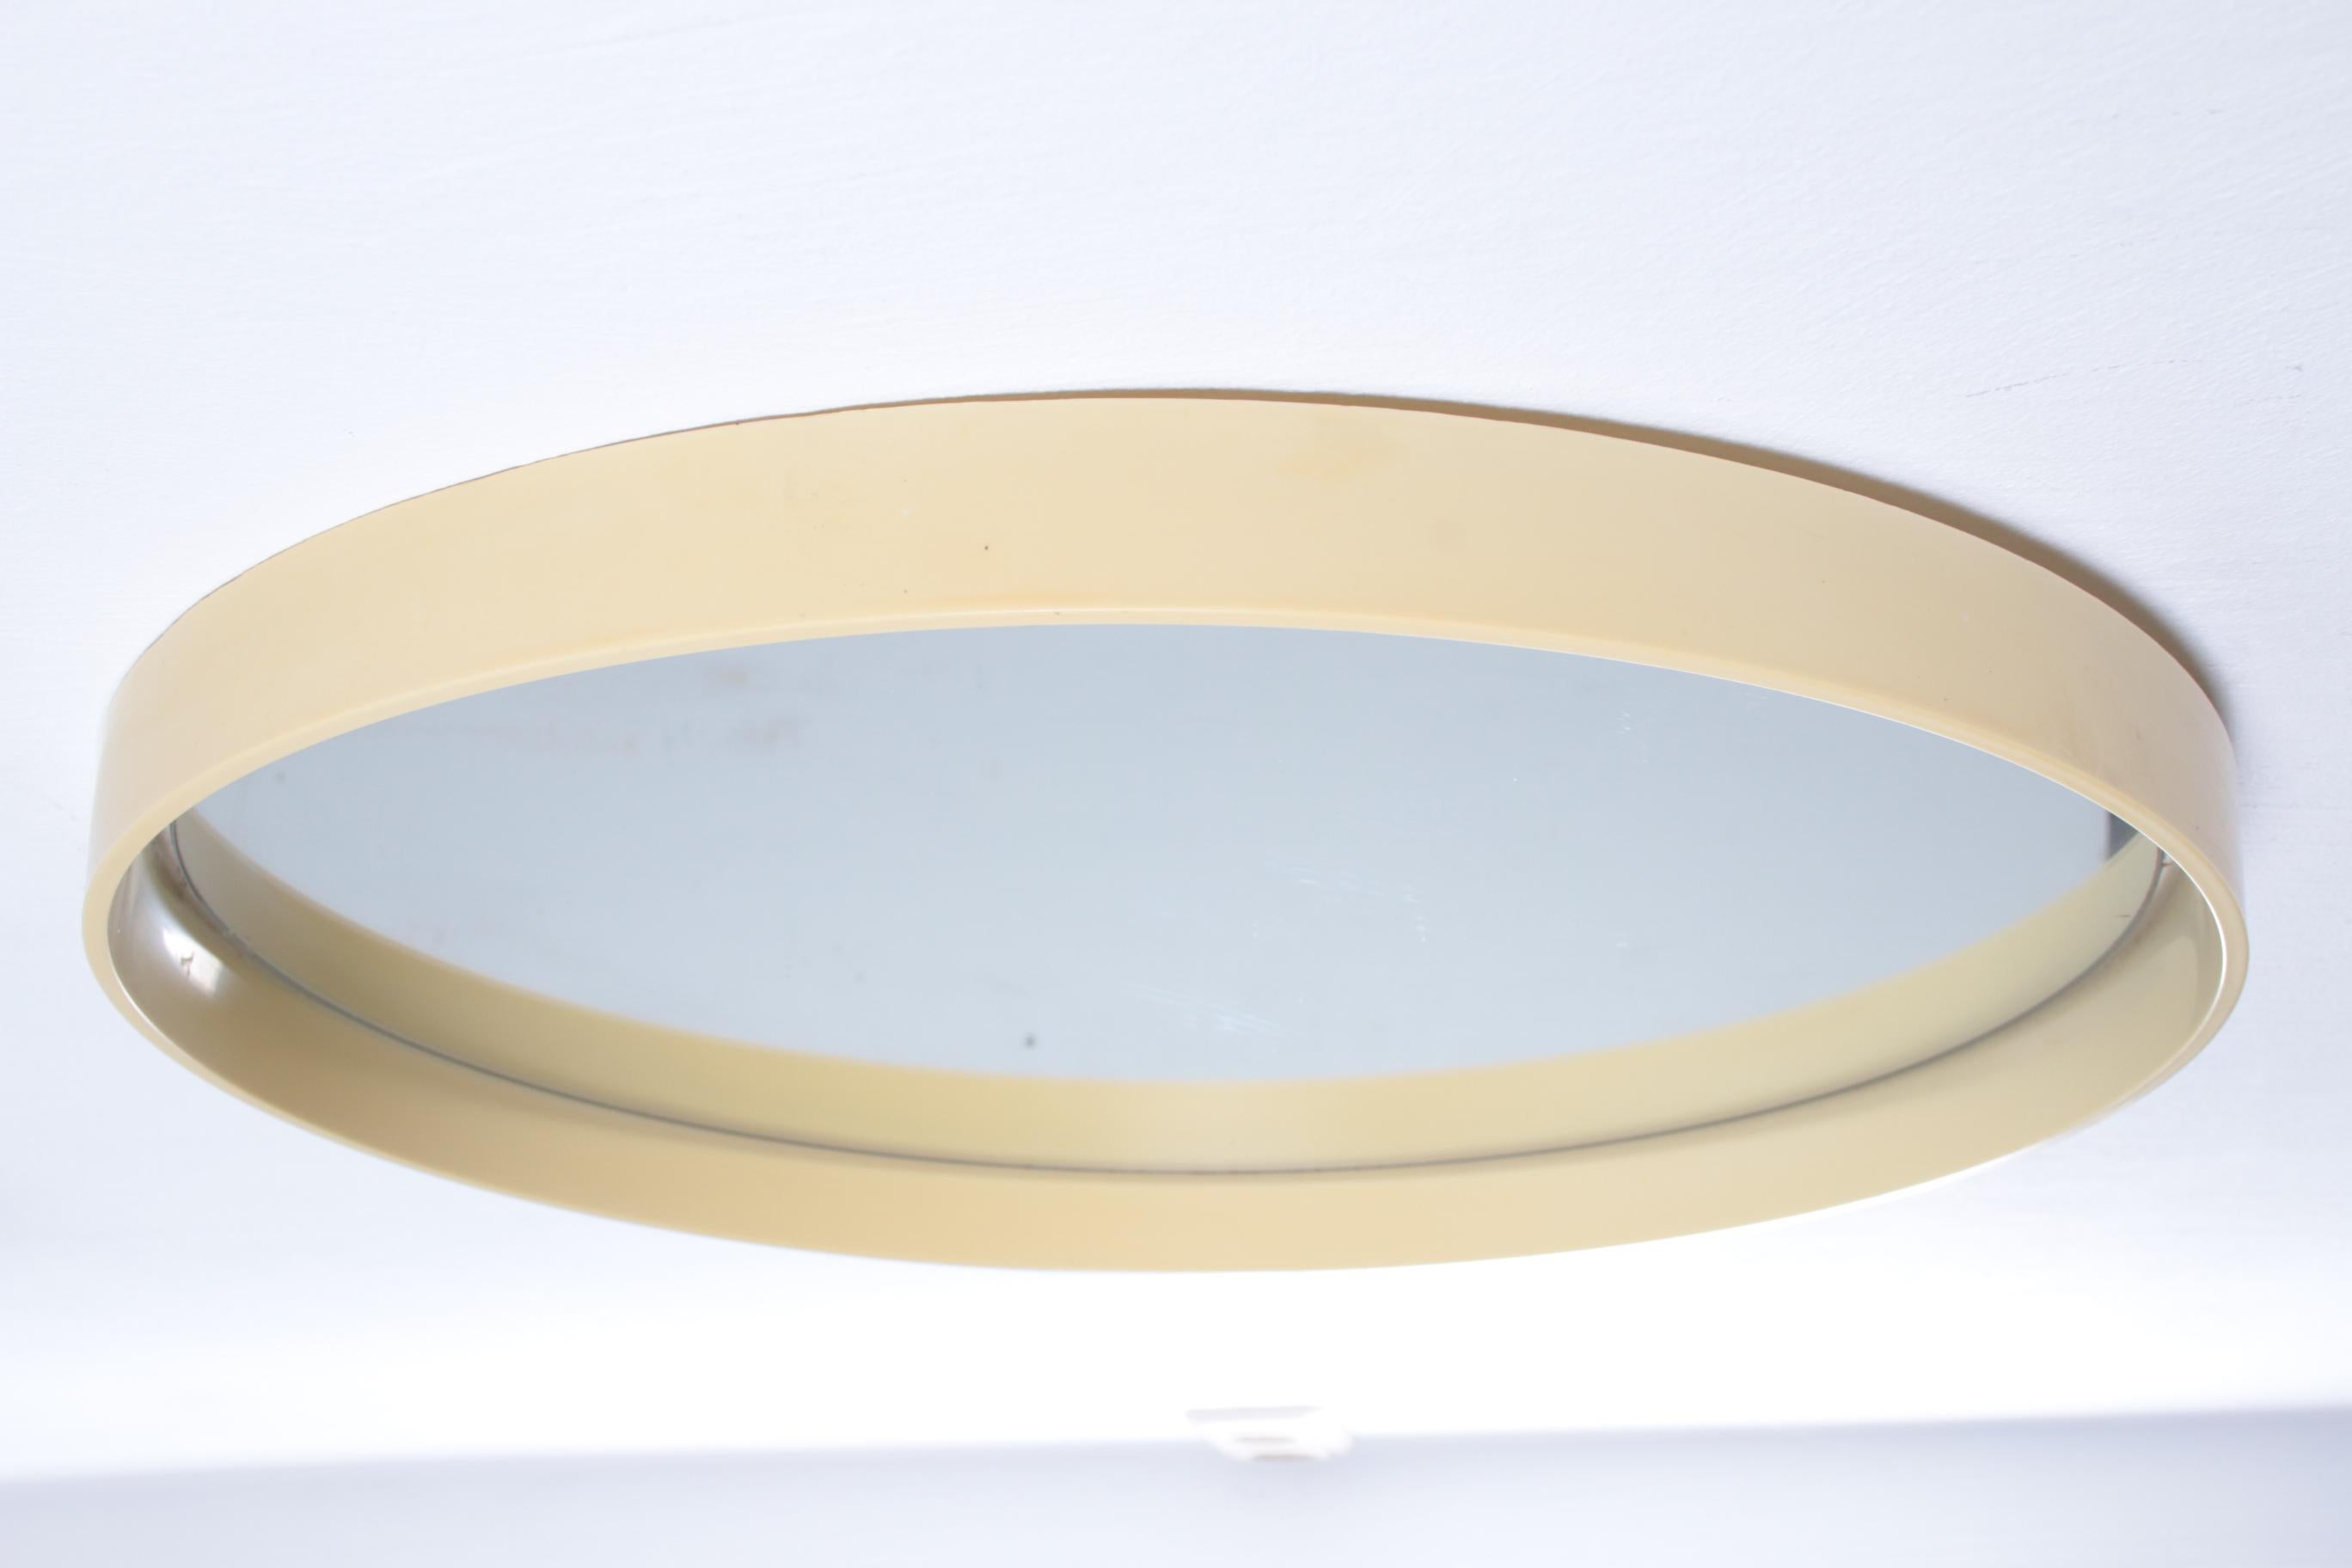 Big Round Creme Wall Mirror with Plastic Edge 1960 For Sale 1